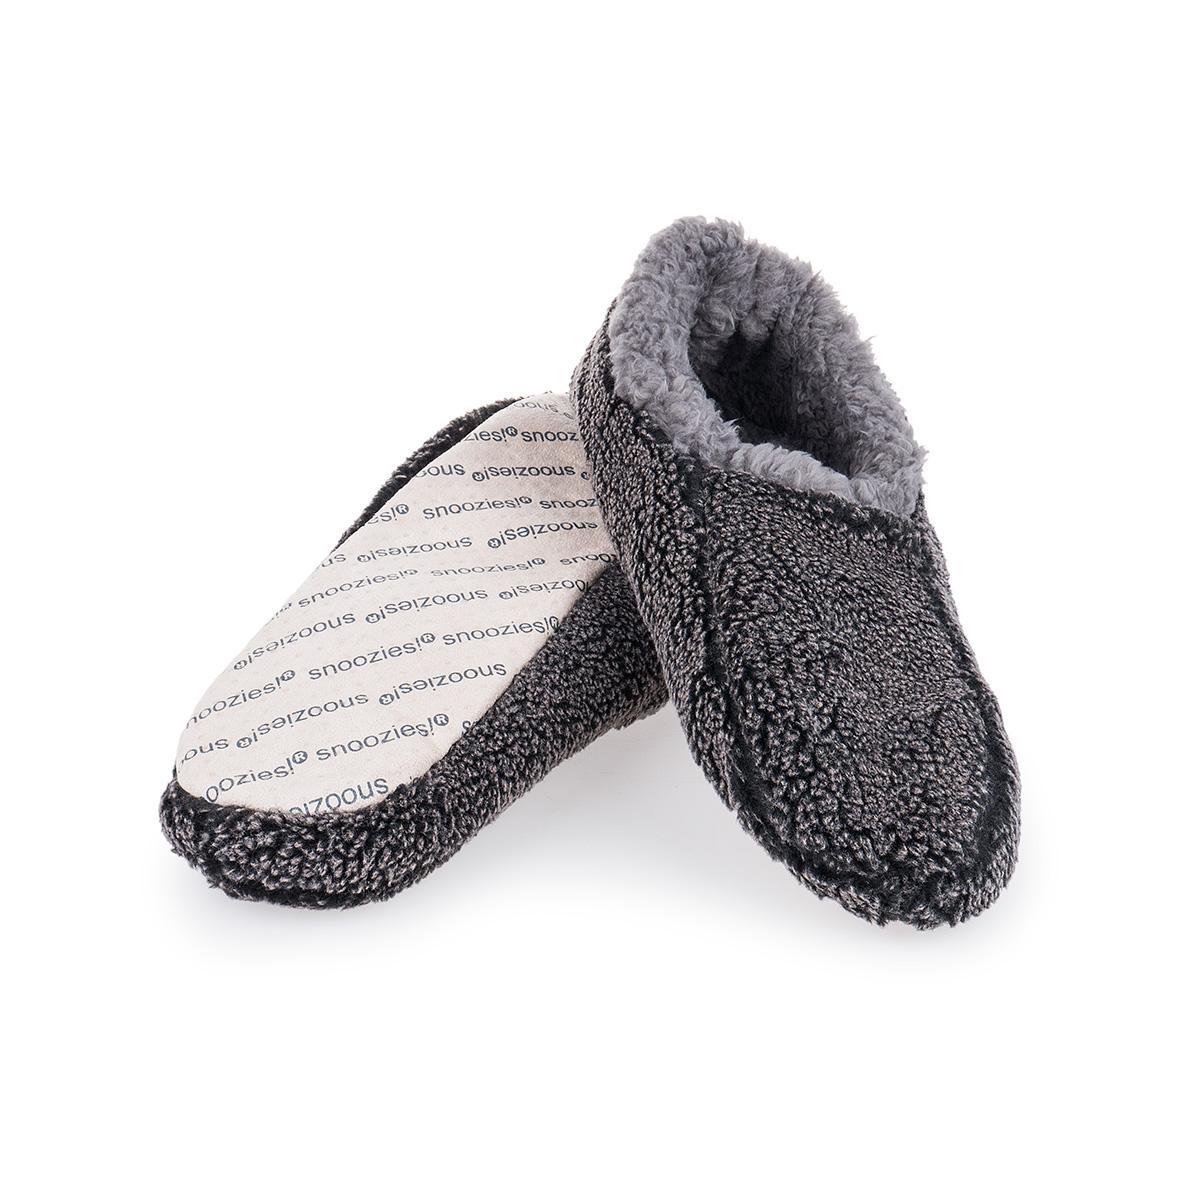  Men's Two Tone Snoozie Slippers